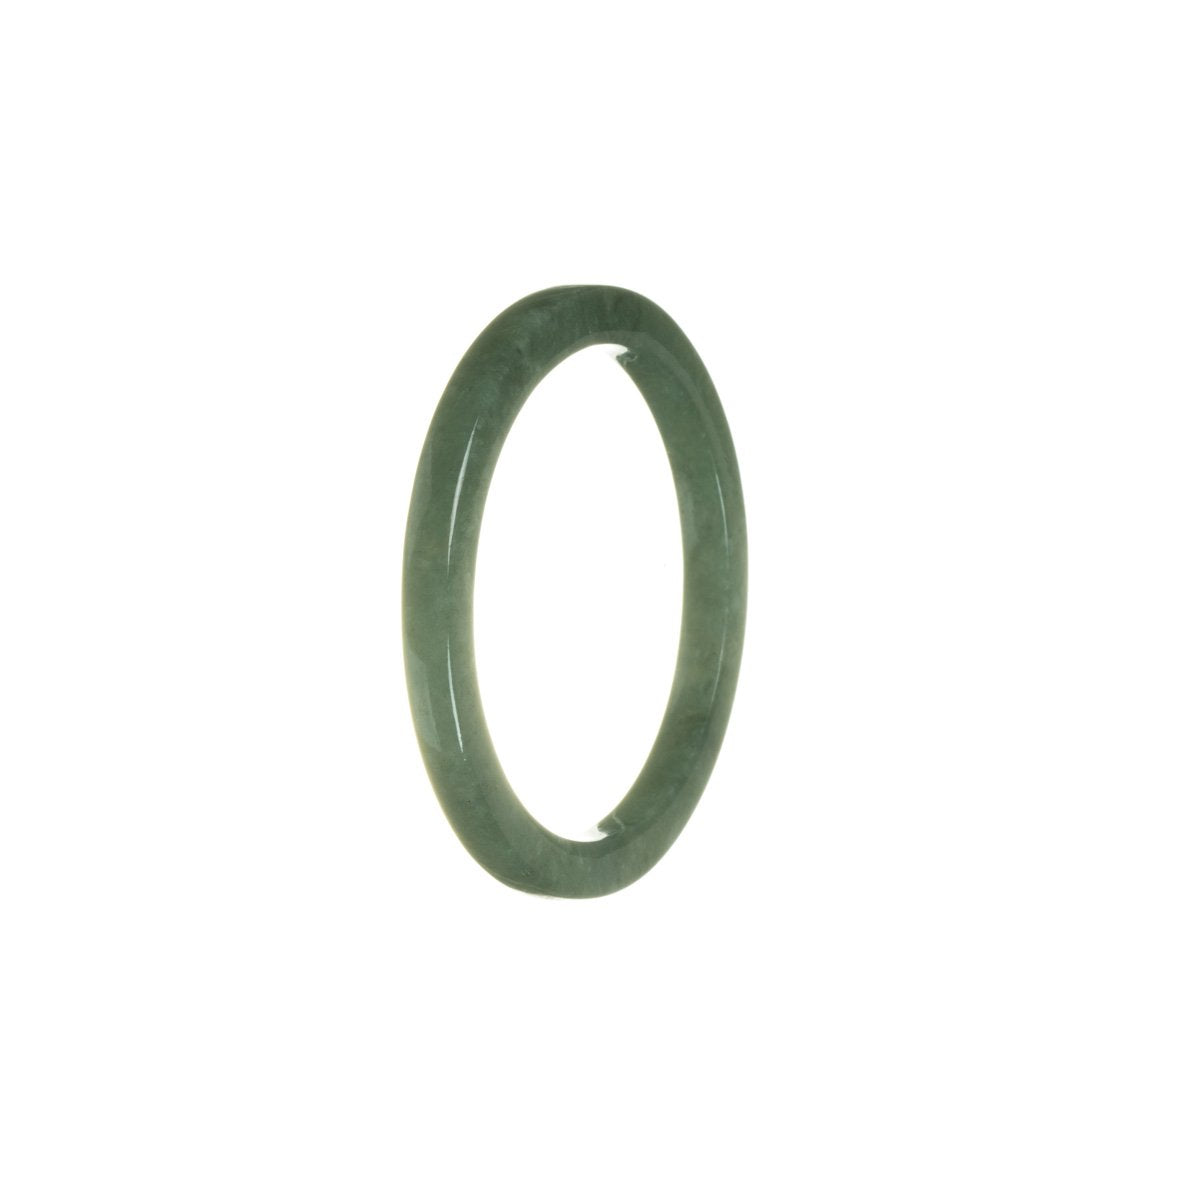 A beautiful green jadeite bangle bracelet with an oval shape, measuring 54mm in size.